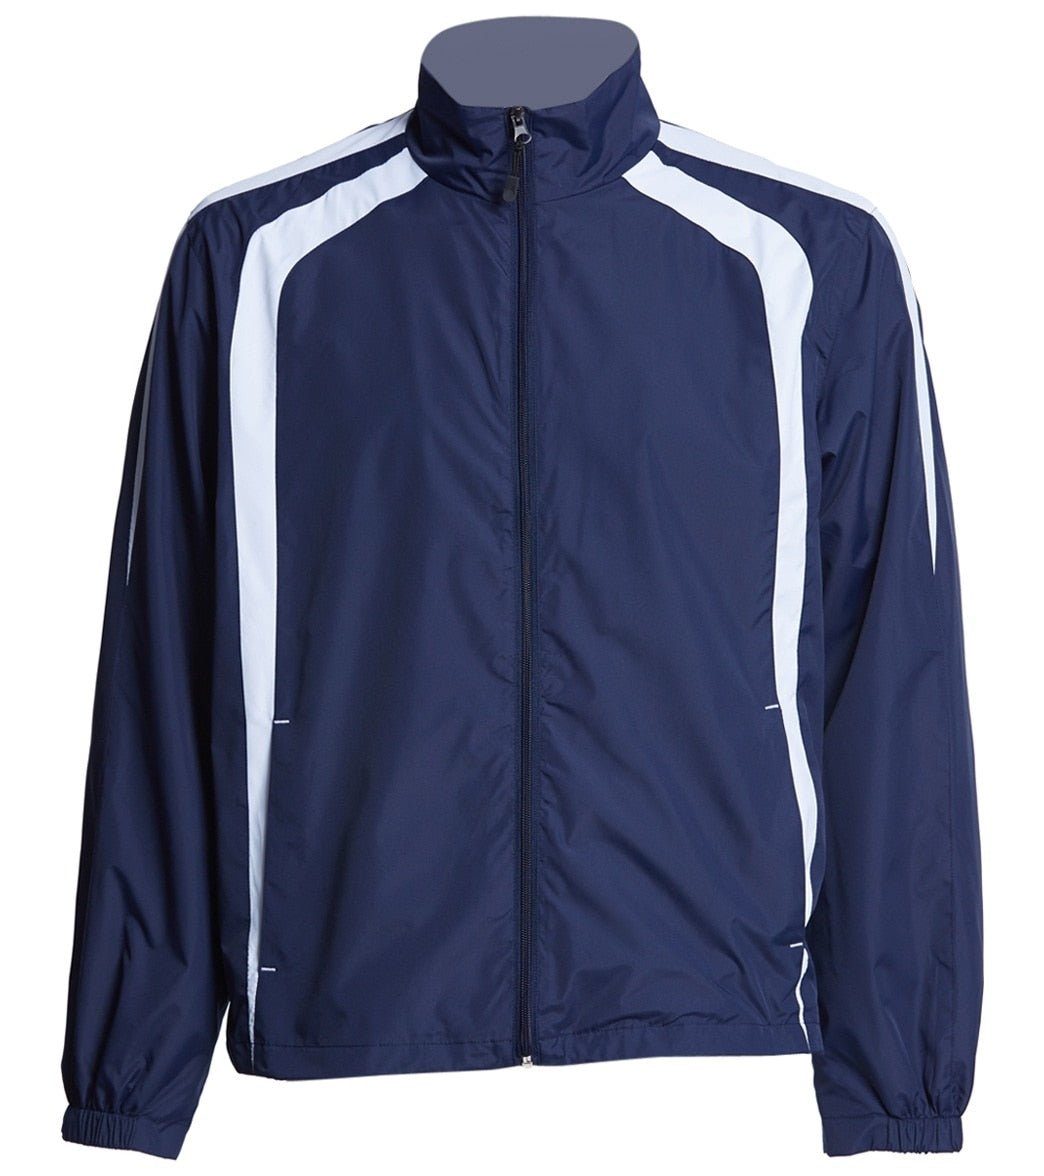 Men's Warm Up Jacket - True Navy/White Large Polyester - Swimoutlet.com